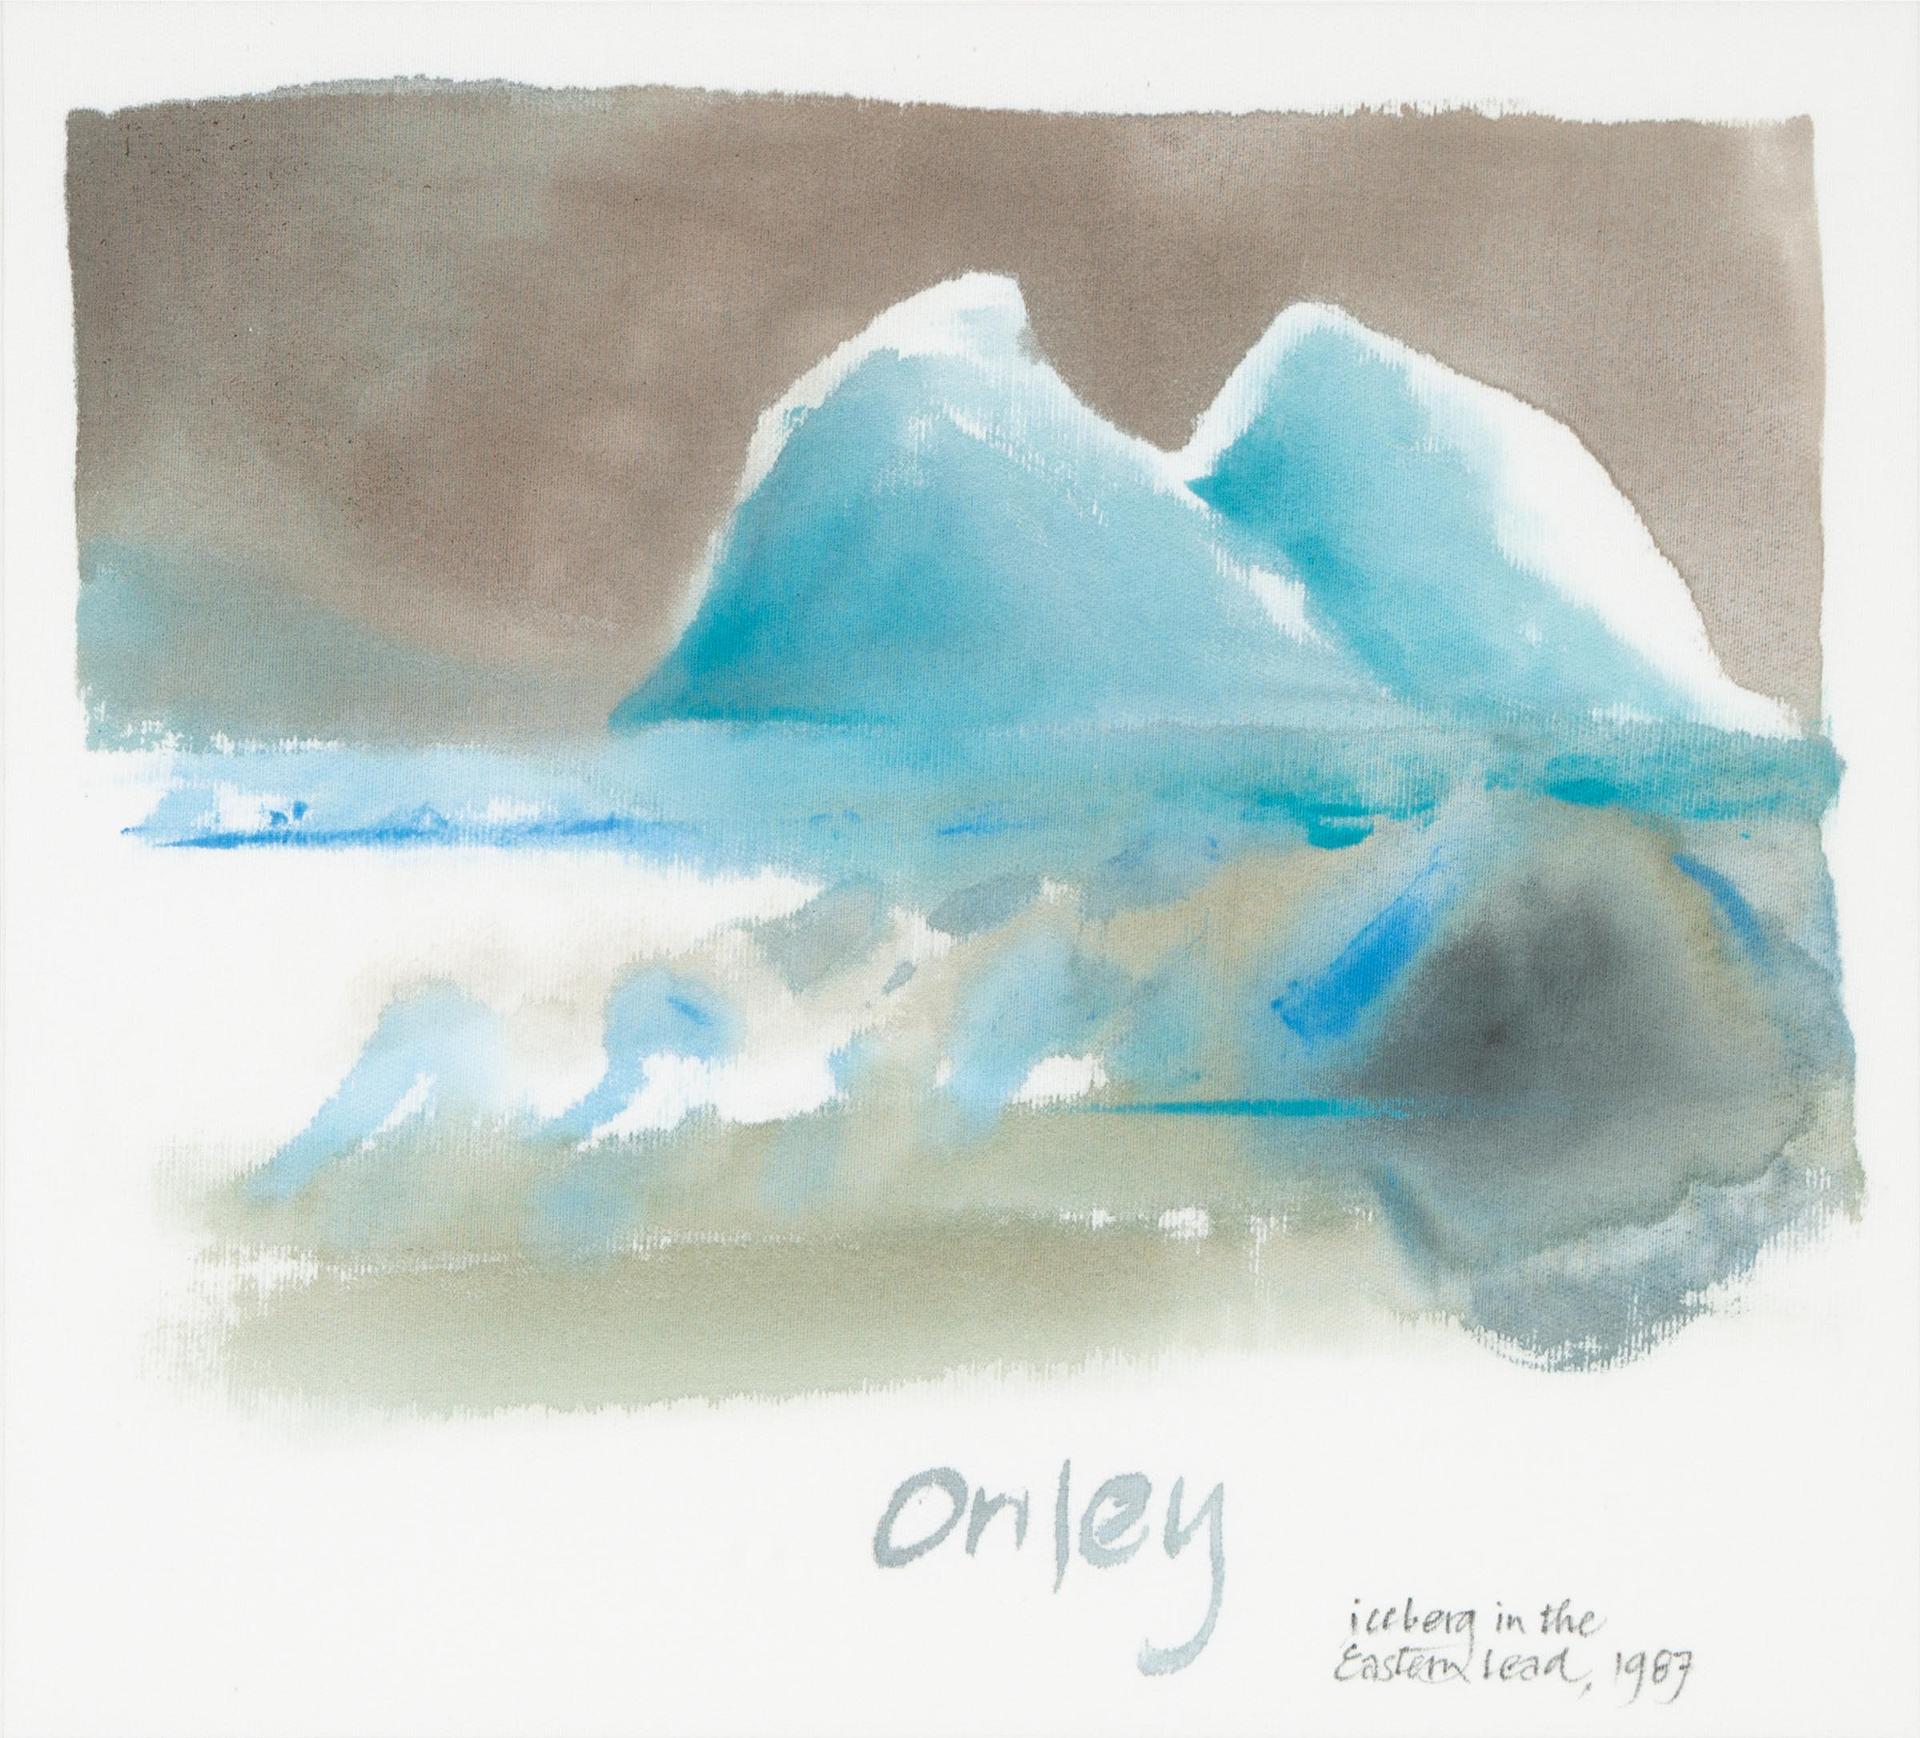 Norman Anthony (Toni) Onley (1928-2004) - Iceberg On The Eastern Lead, 1987